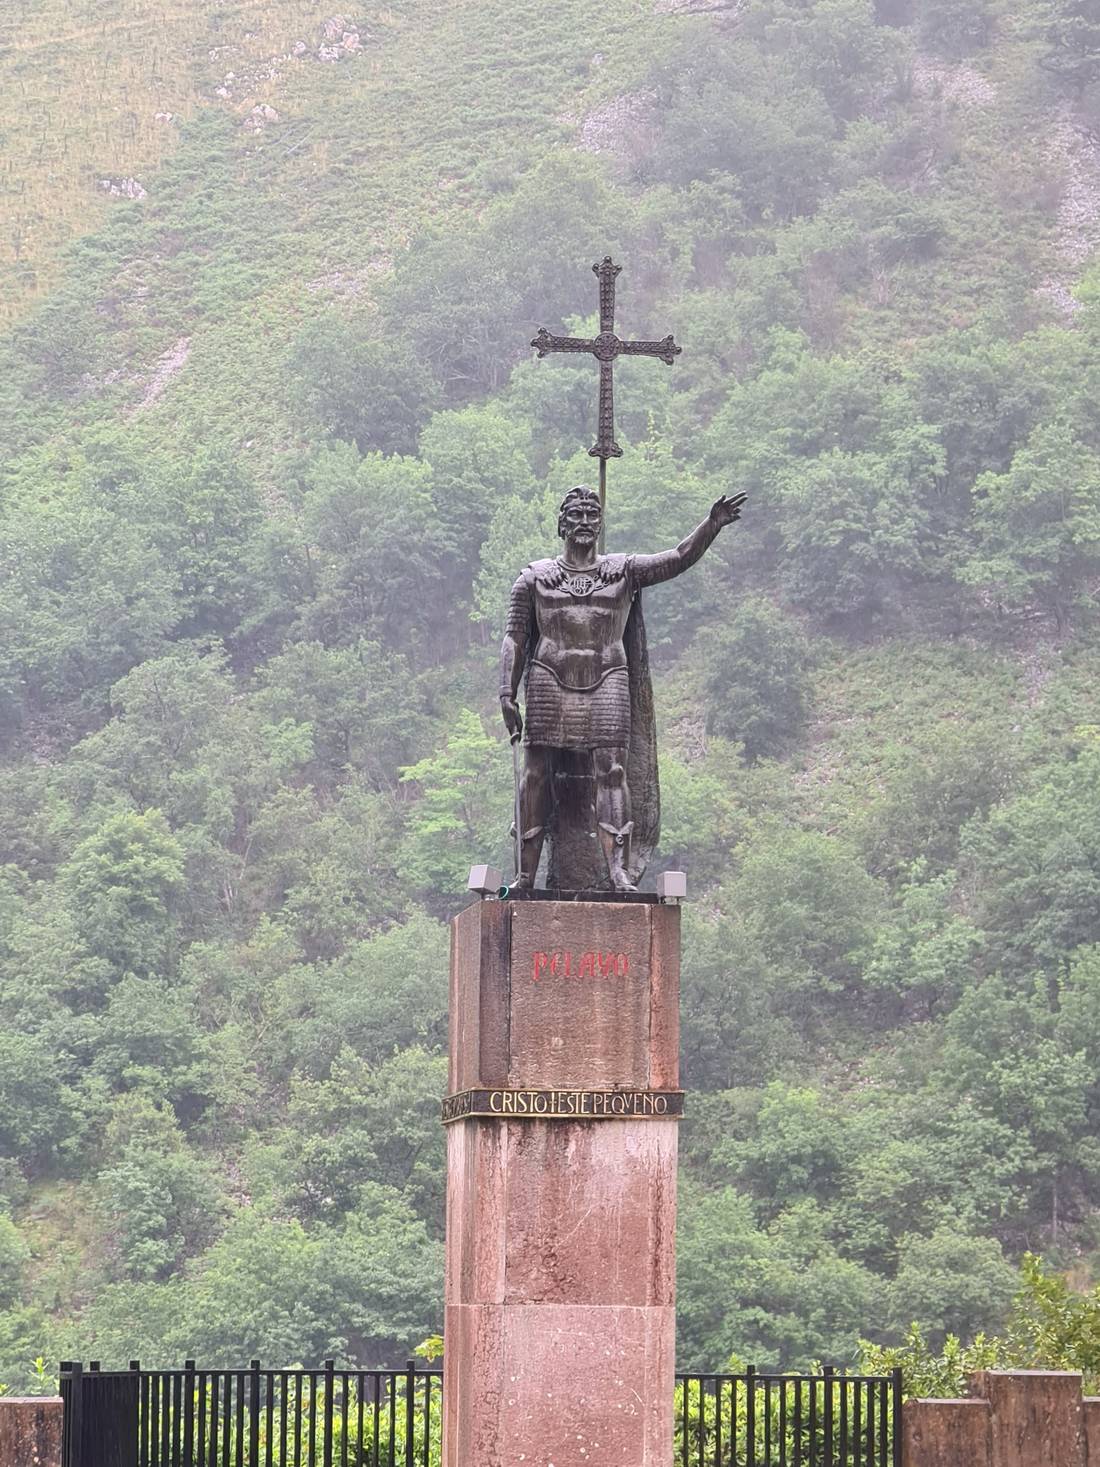 The pedestal reads: ”Our hope is in Christ. This small mountain will be the salvation of Spain.”